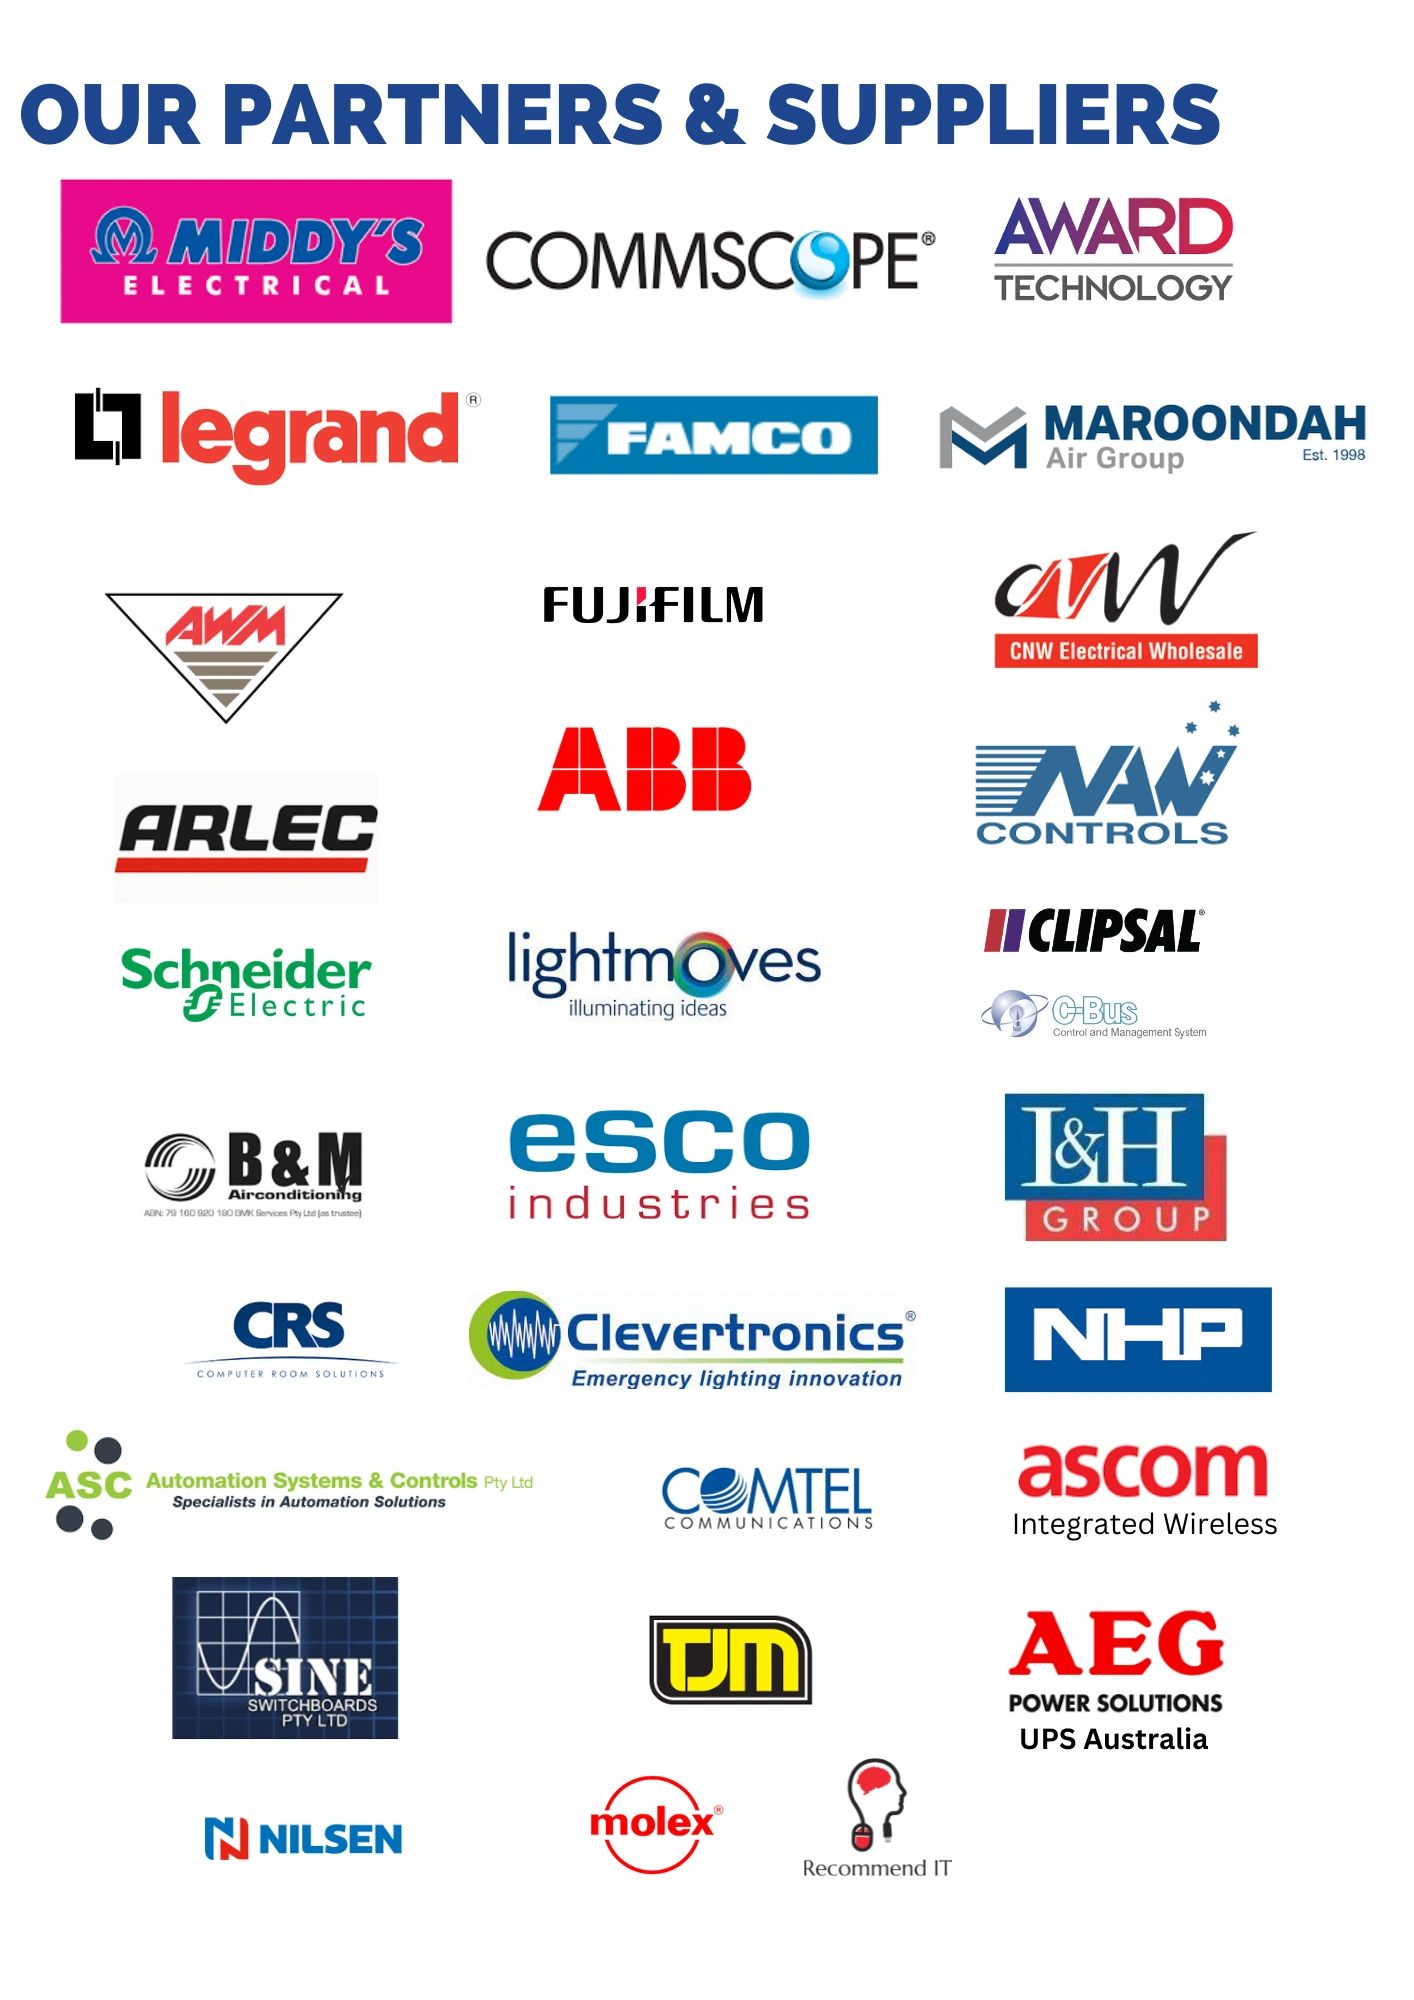 Our Partners and Suppliers